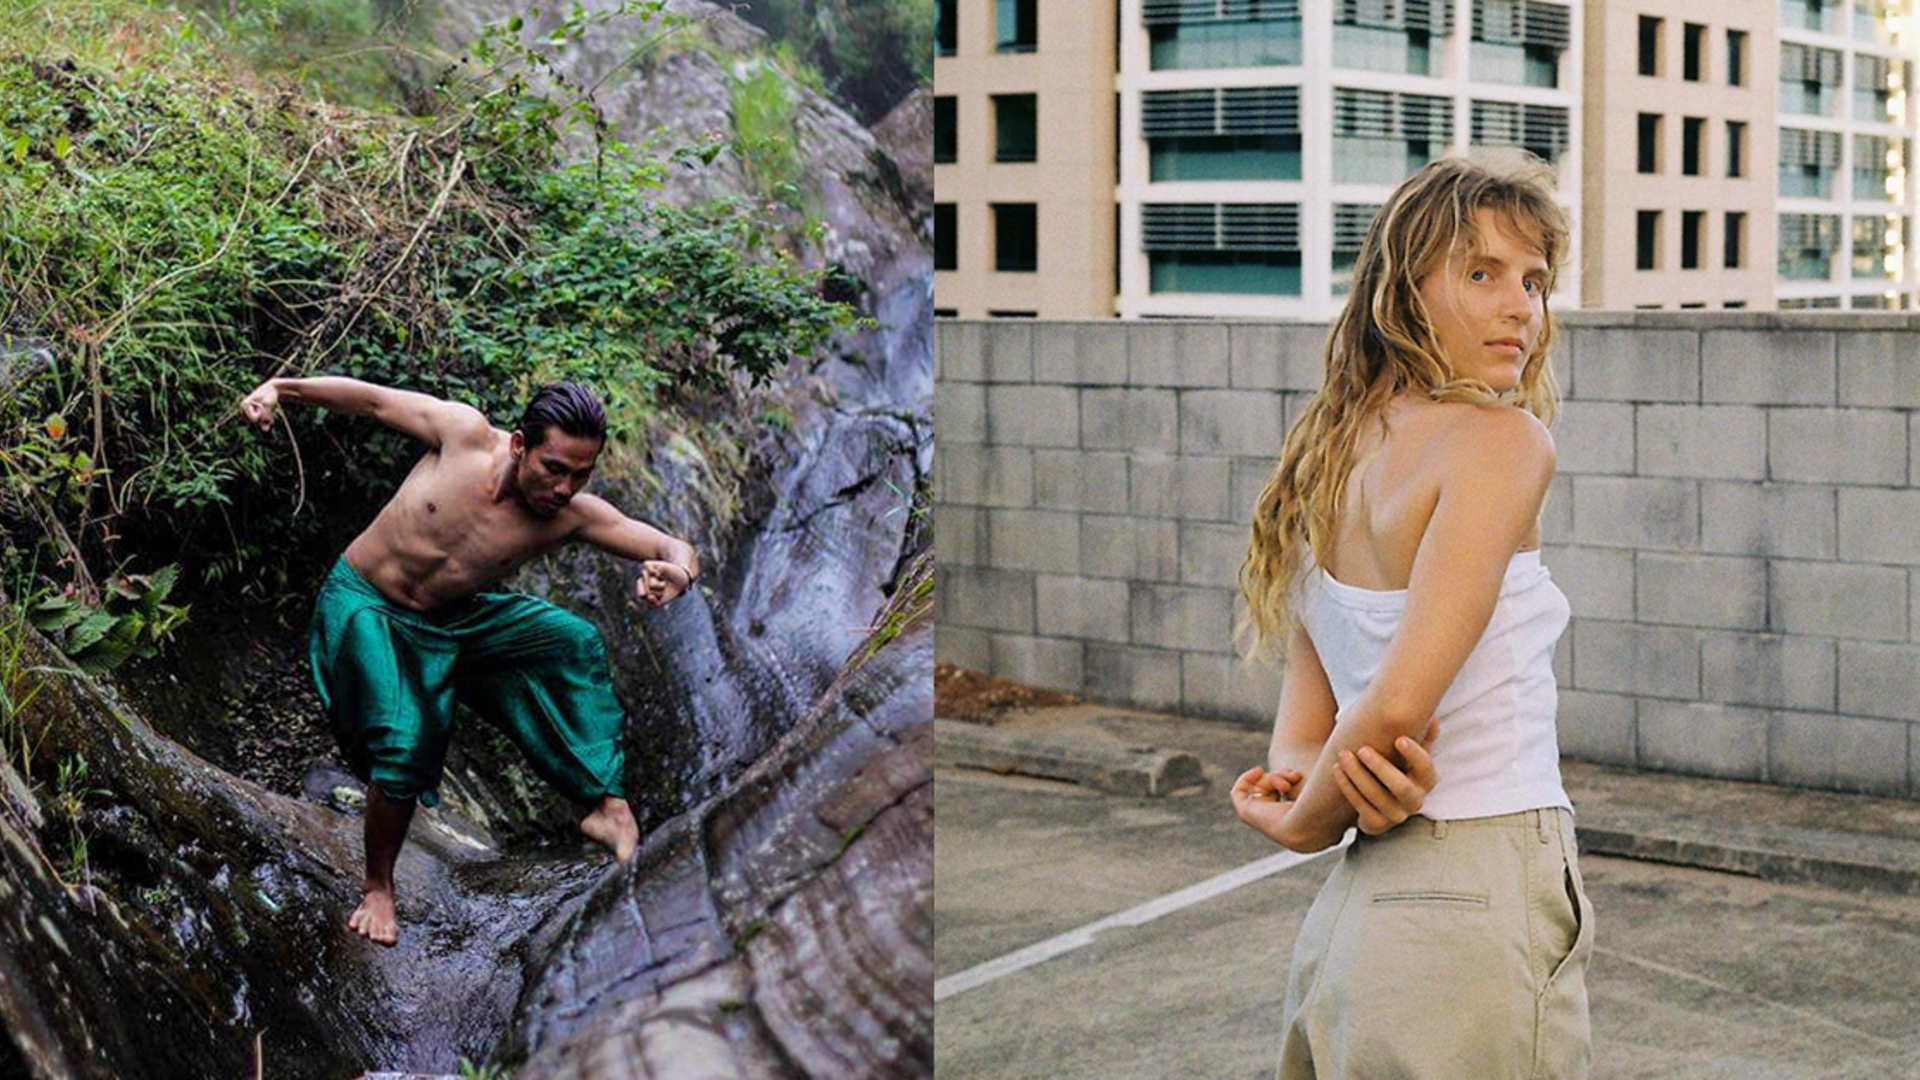 Two images side by side. On the left, Riyo Tulus Pernando is dancing on a large tree trunk, wearing emerald green pants. On the right dancer Georgia Rudd stands on a rooftop carpark, wearing a white sleeveless top and beige pants. She is looking directly at you